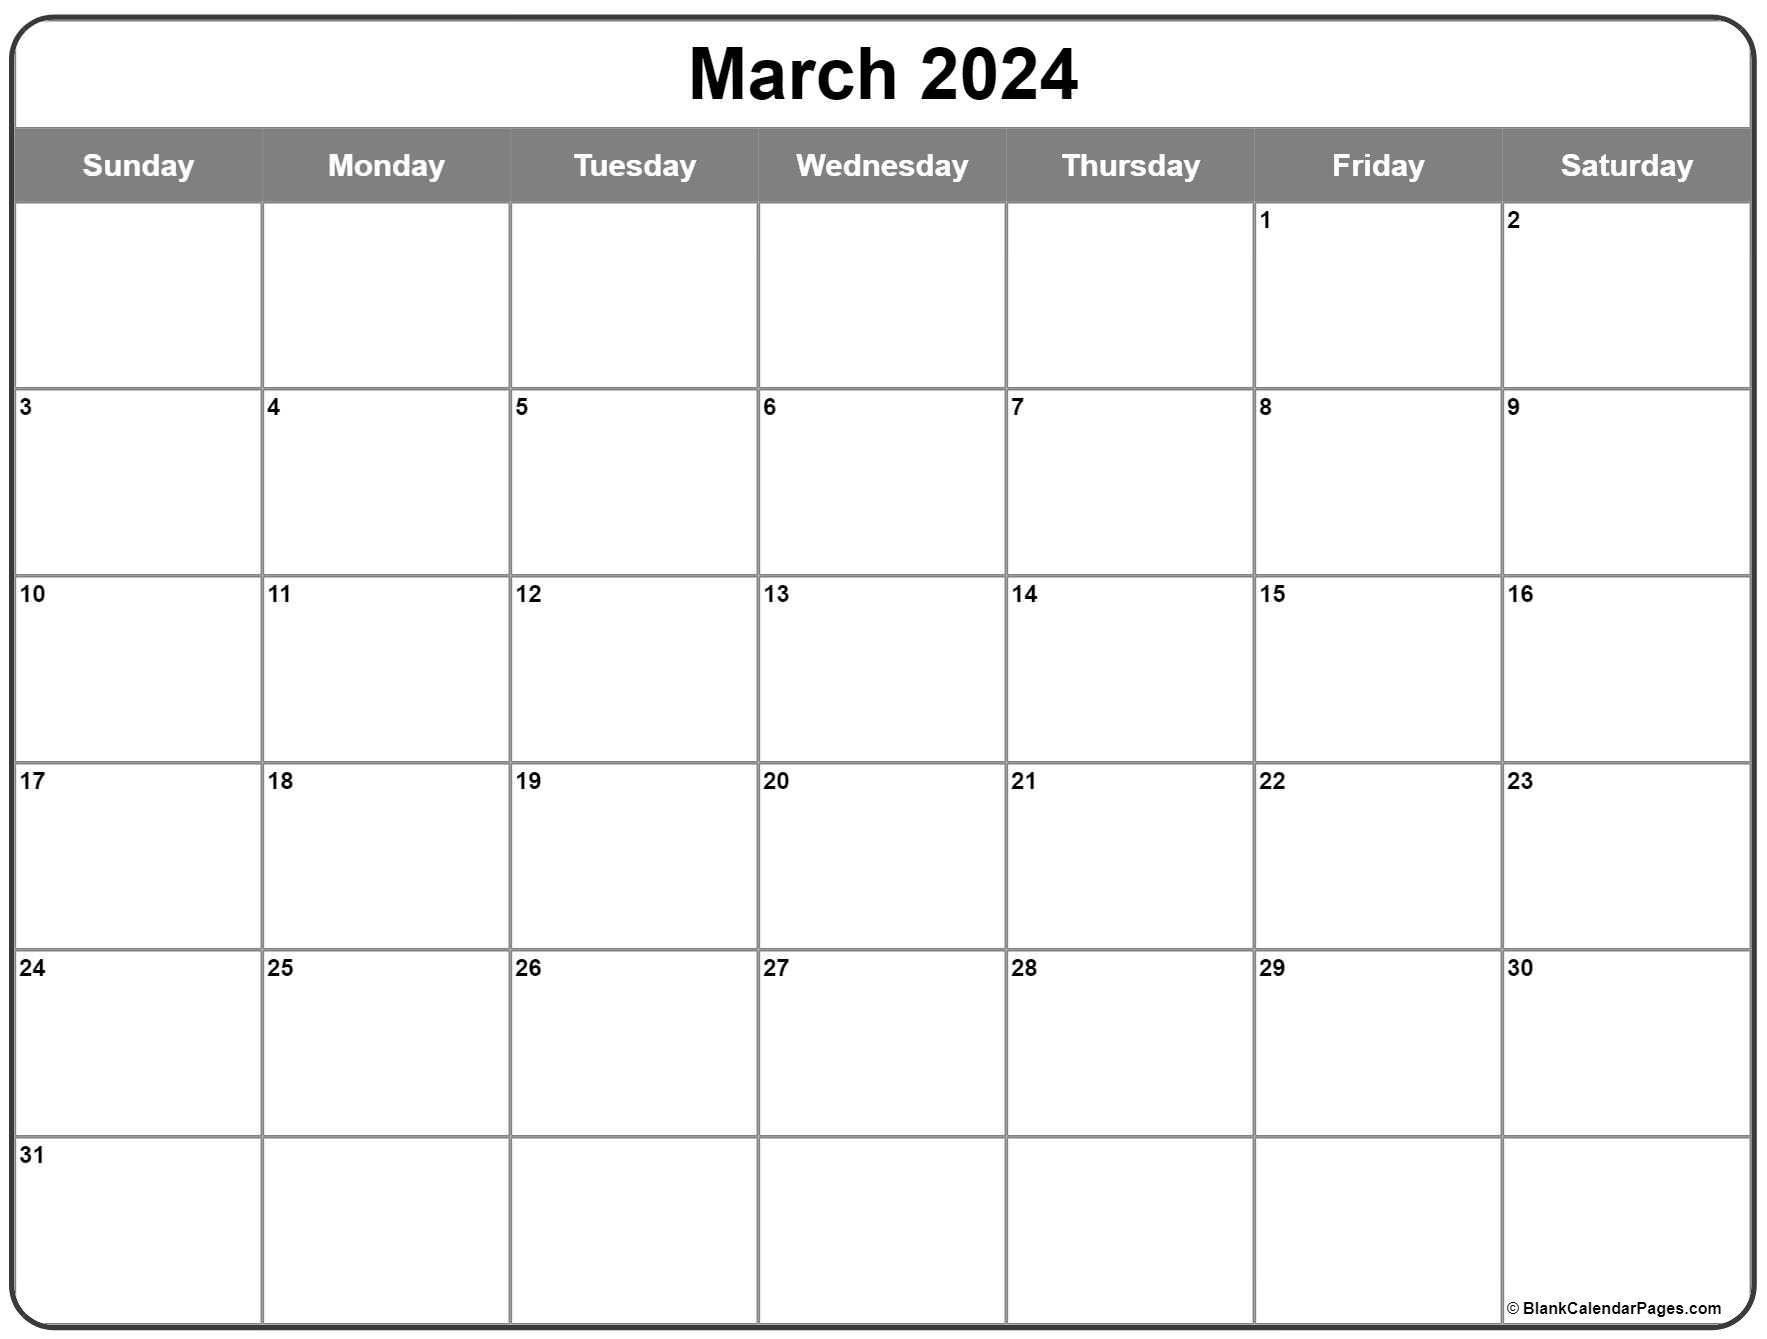 free-printable-calendar-large-boxes-2023-time-and-date-calendar-2023